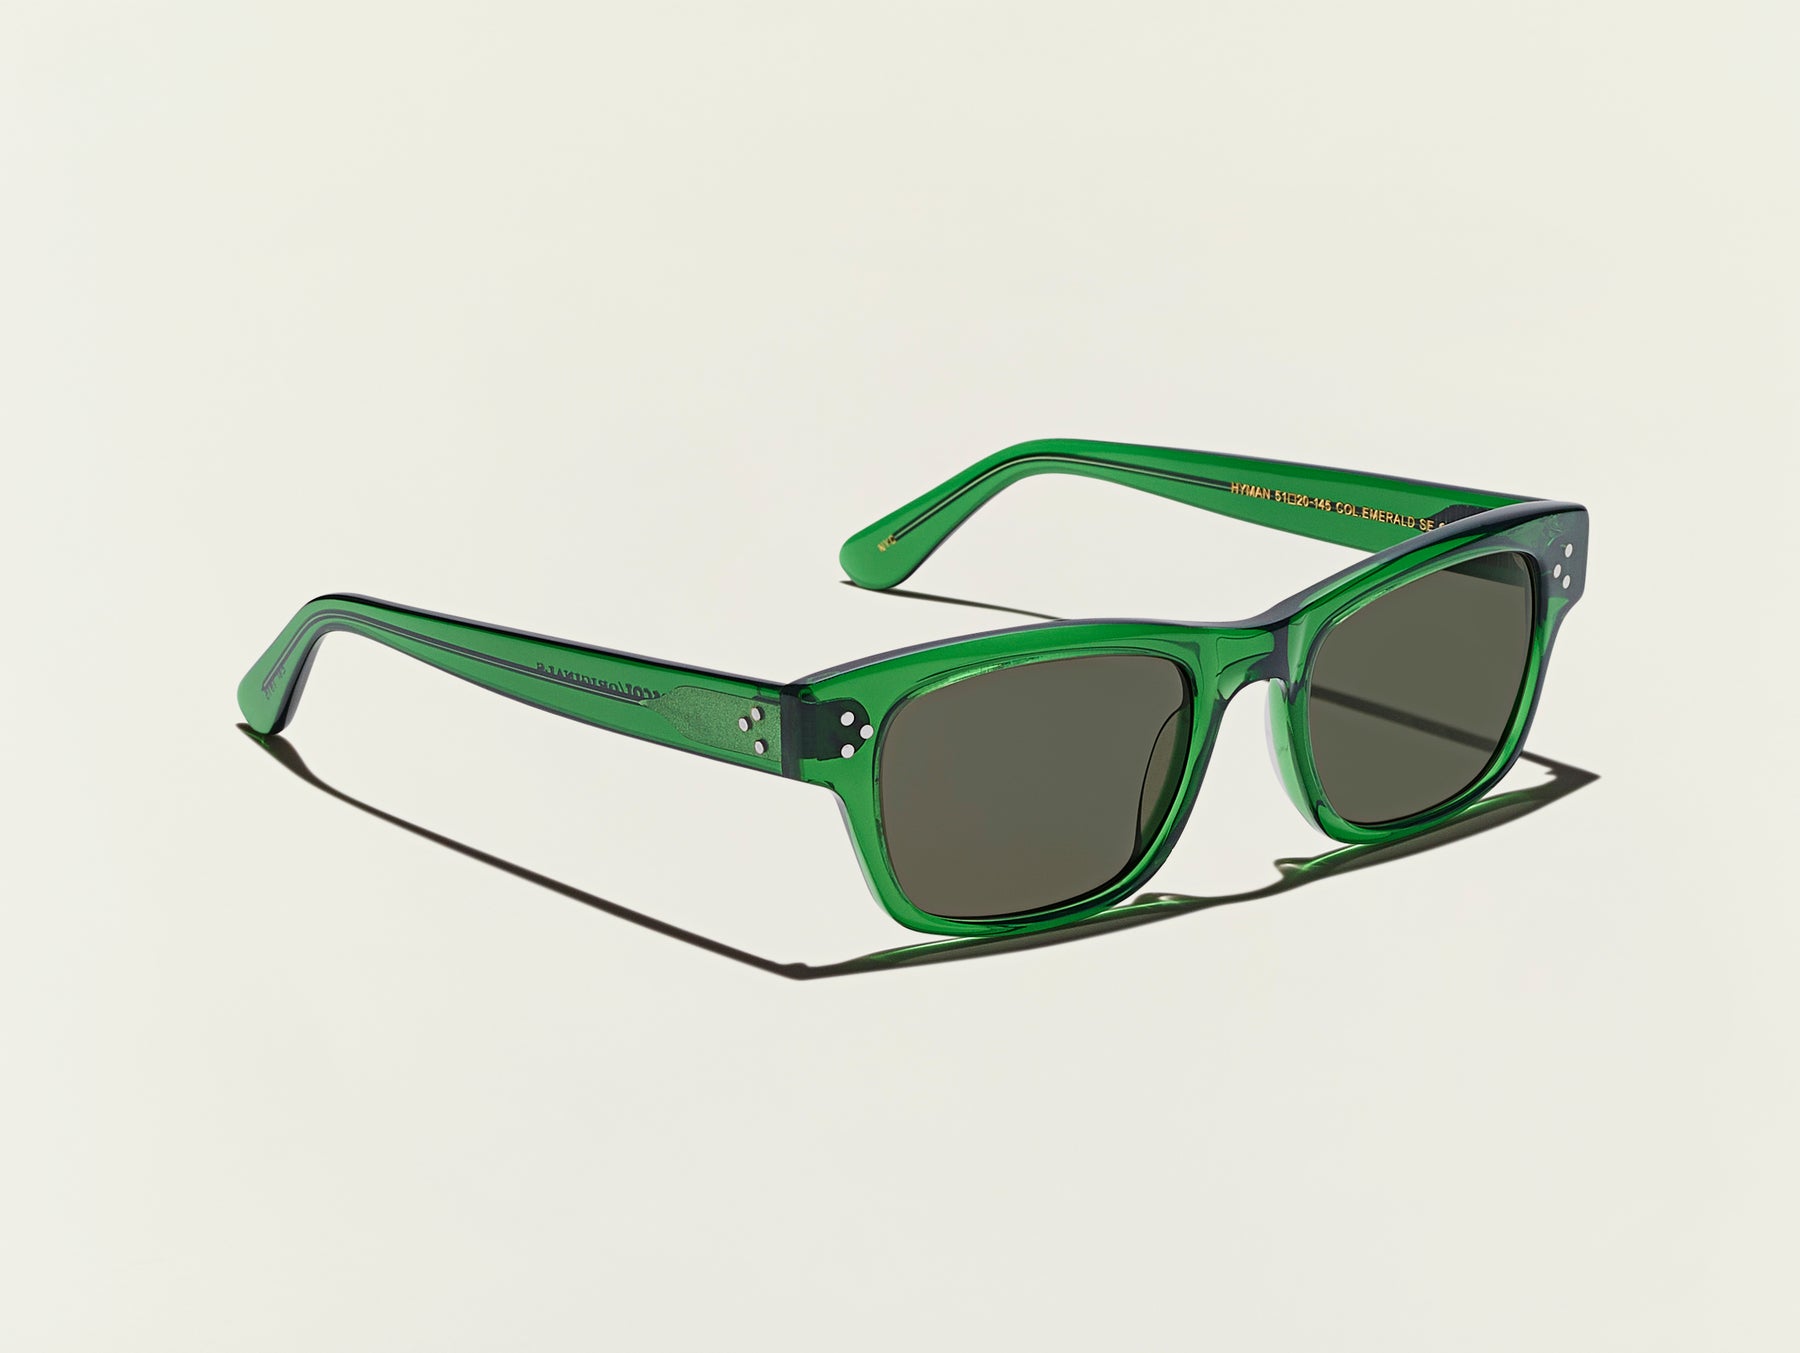 The HYMAN SUN in Emerald with G-15 Glass Lenses